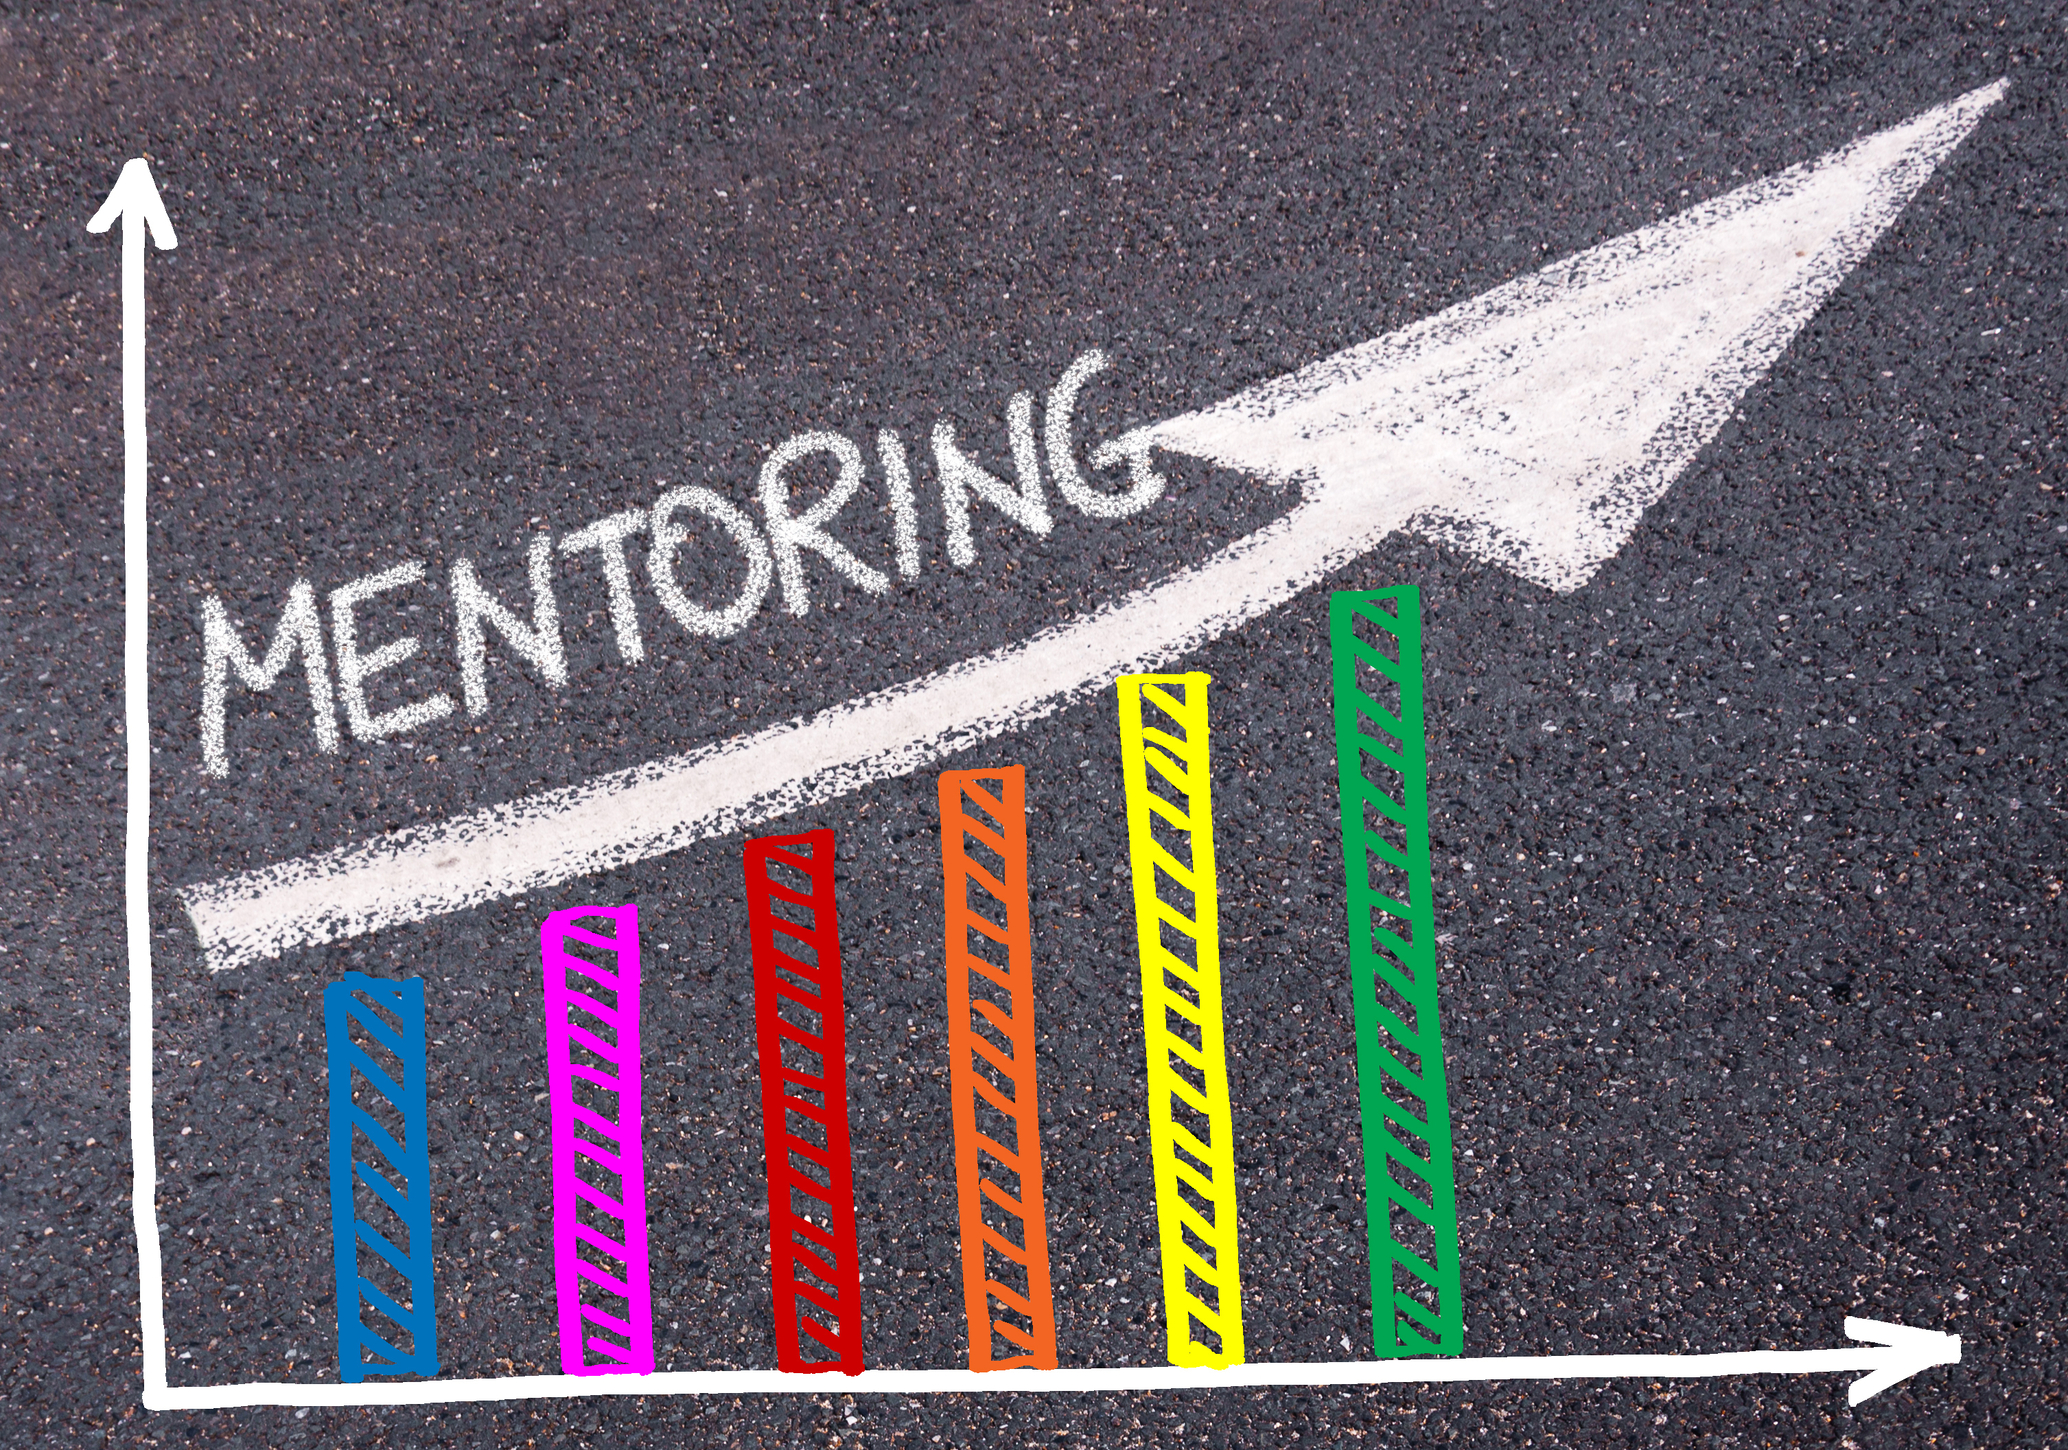 SQL Server Mentoring – Do you need some occasional help?